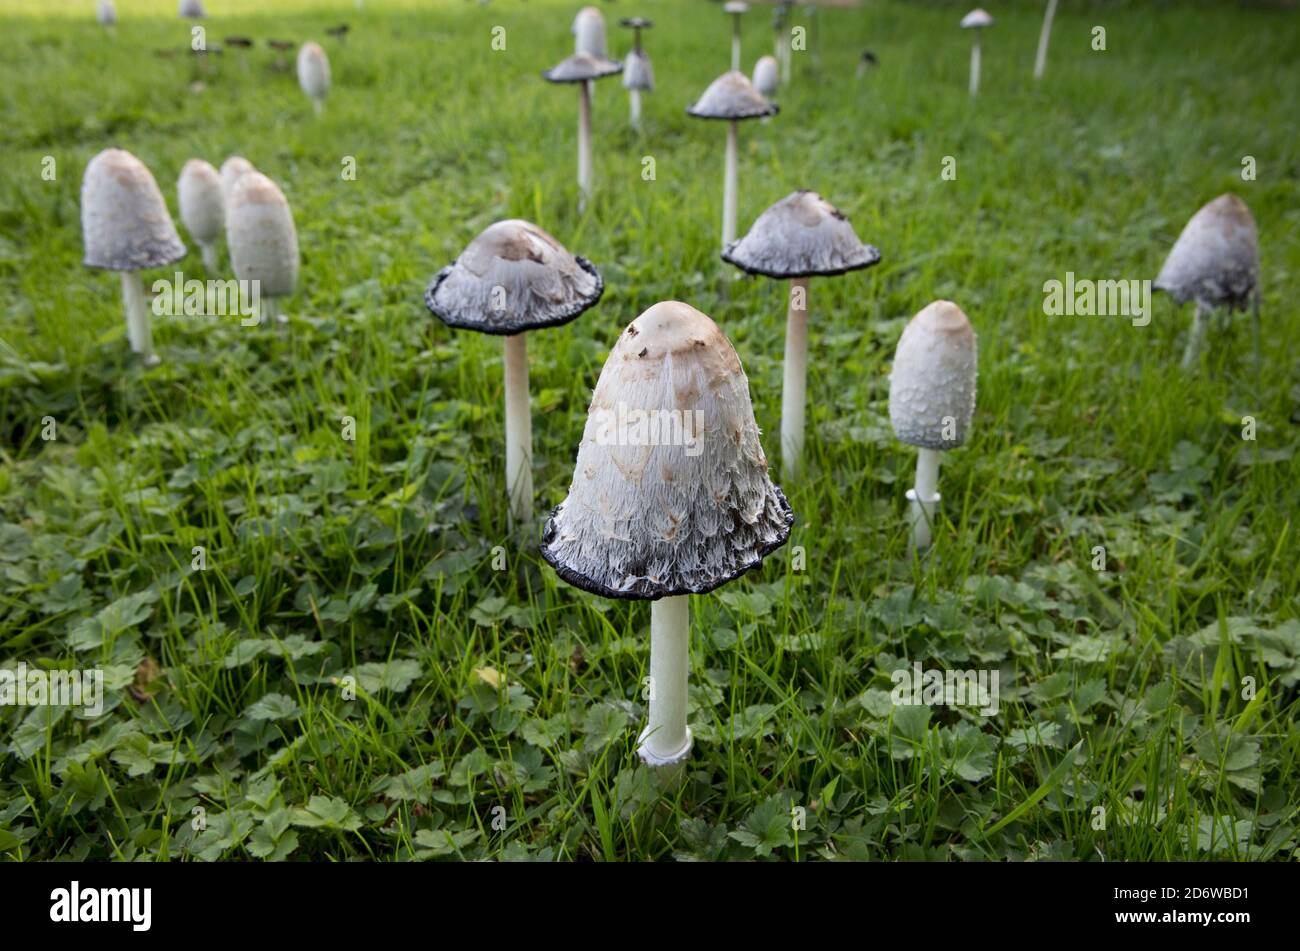 Shaggy Inkcap fungi Coprinus comatus at later stage in meadow Cotswolds UK Also known as Judges wig or Lawyers wig and as it matures it produces ink. Stock Photo